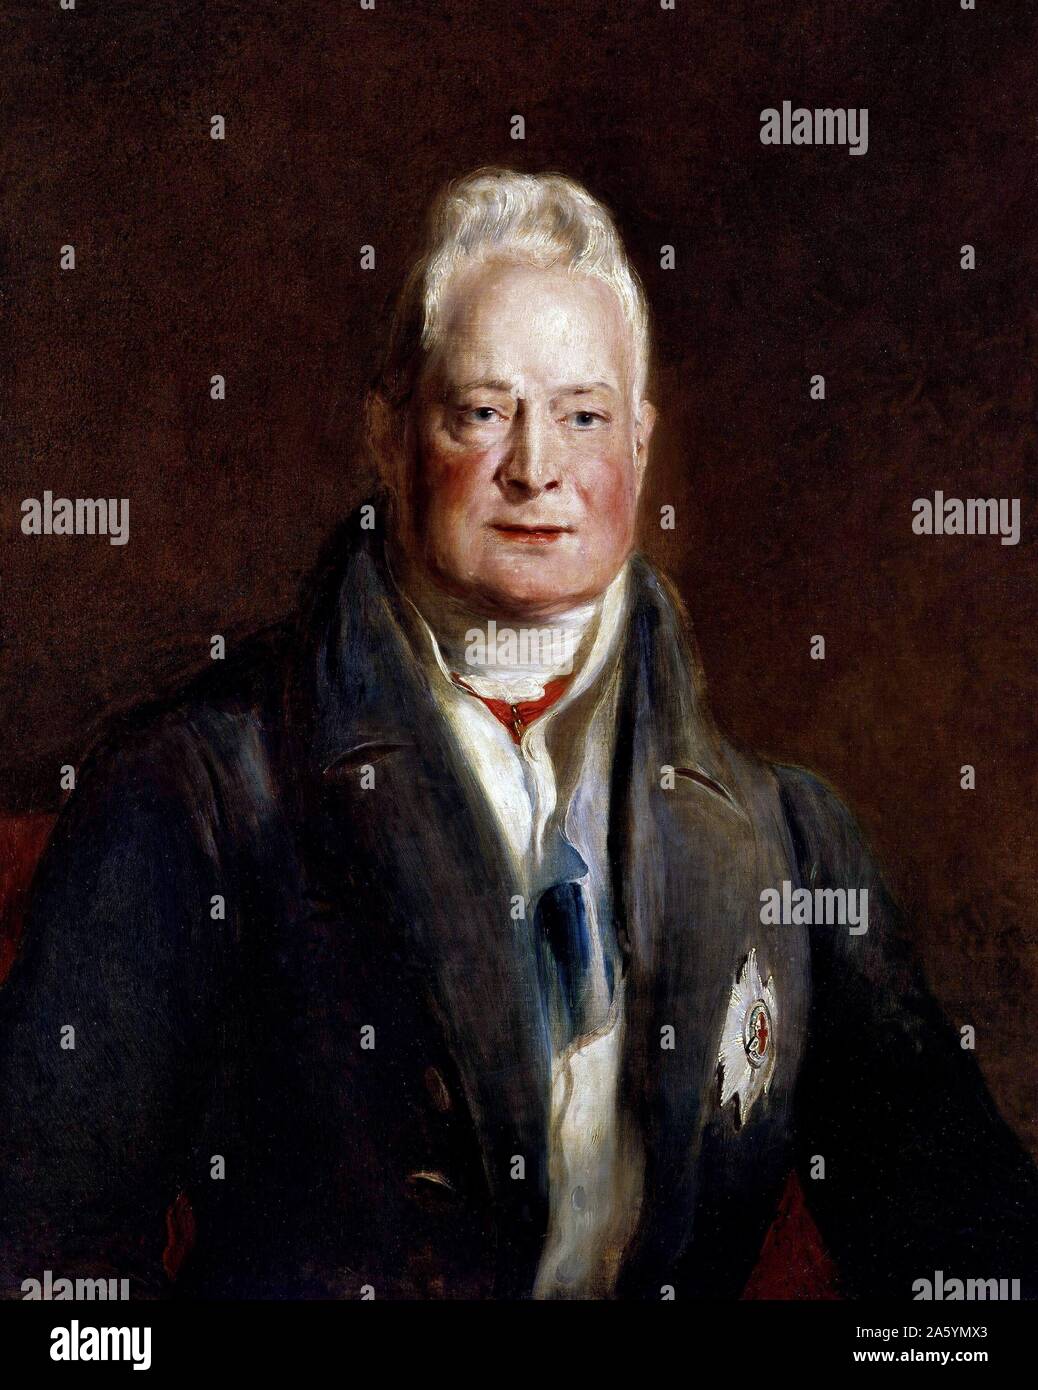 Portrait of William IV, King of the United Kingdom of Great Britain and Ireland, as well as Hanover from 26 June 1830 until his death. Lived from 21st August 1765 ñ 20 June 1837. The third son of George III and younger brother and successor to George IV. Stock Photo